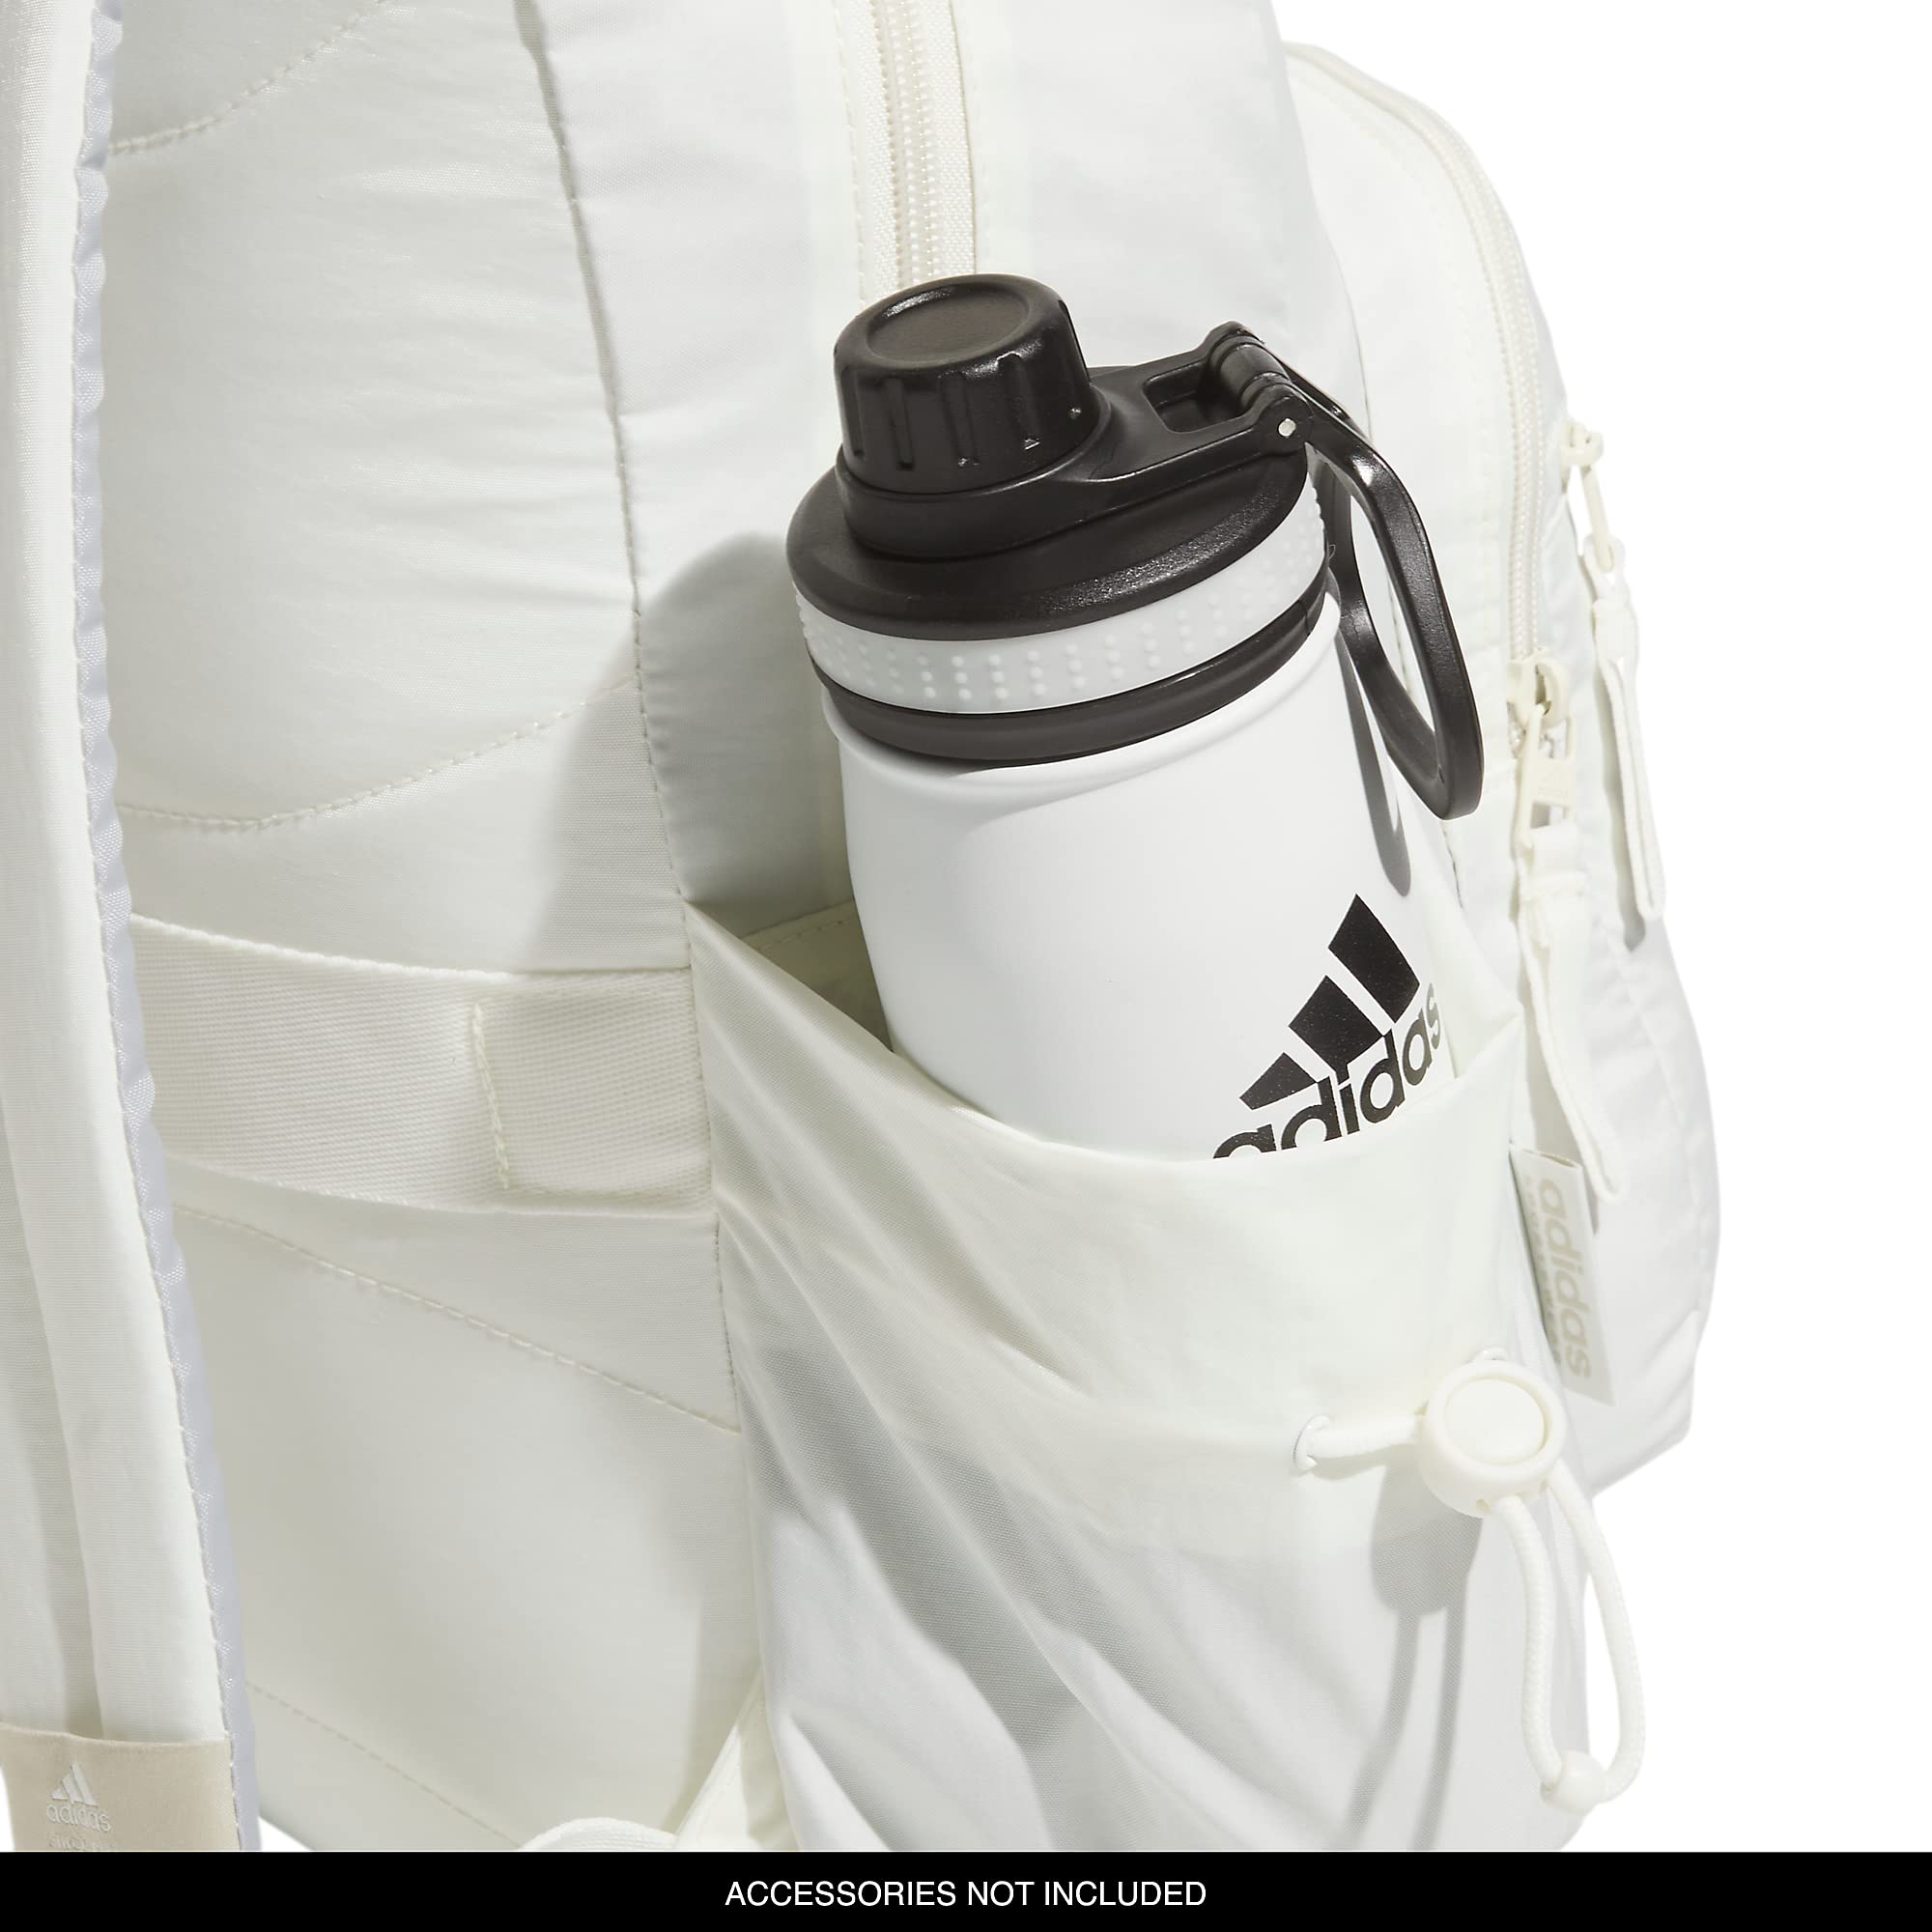 adidas Weekender Sport Fashion Compact Smaller Backpack with Detachable Mini valuables Pouch, Off White, One Size